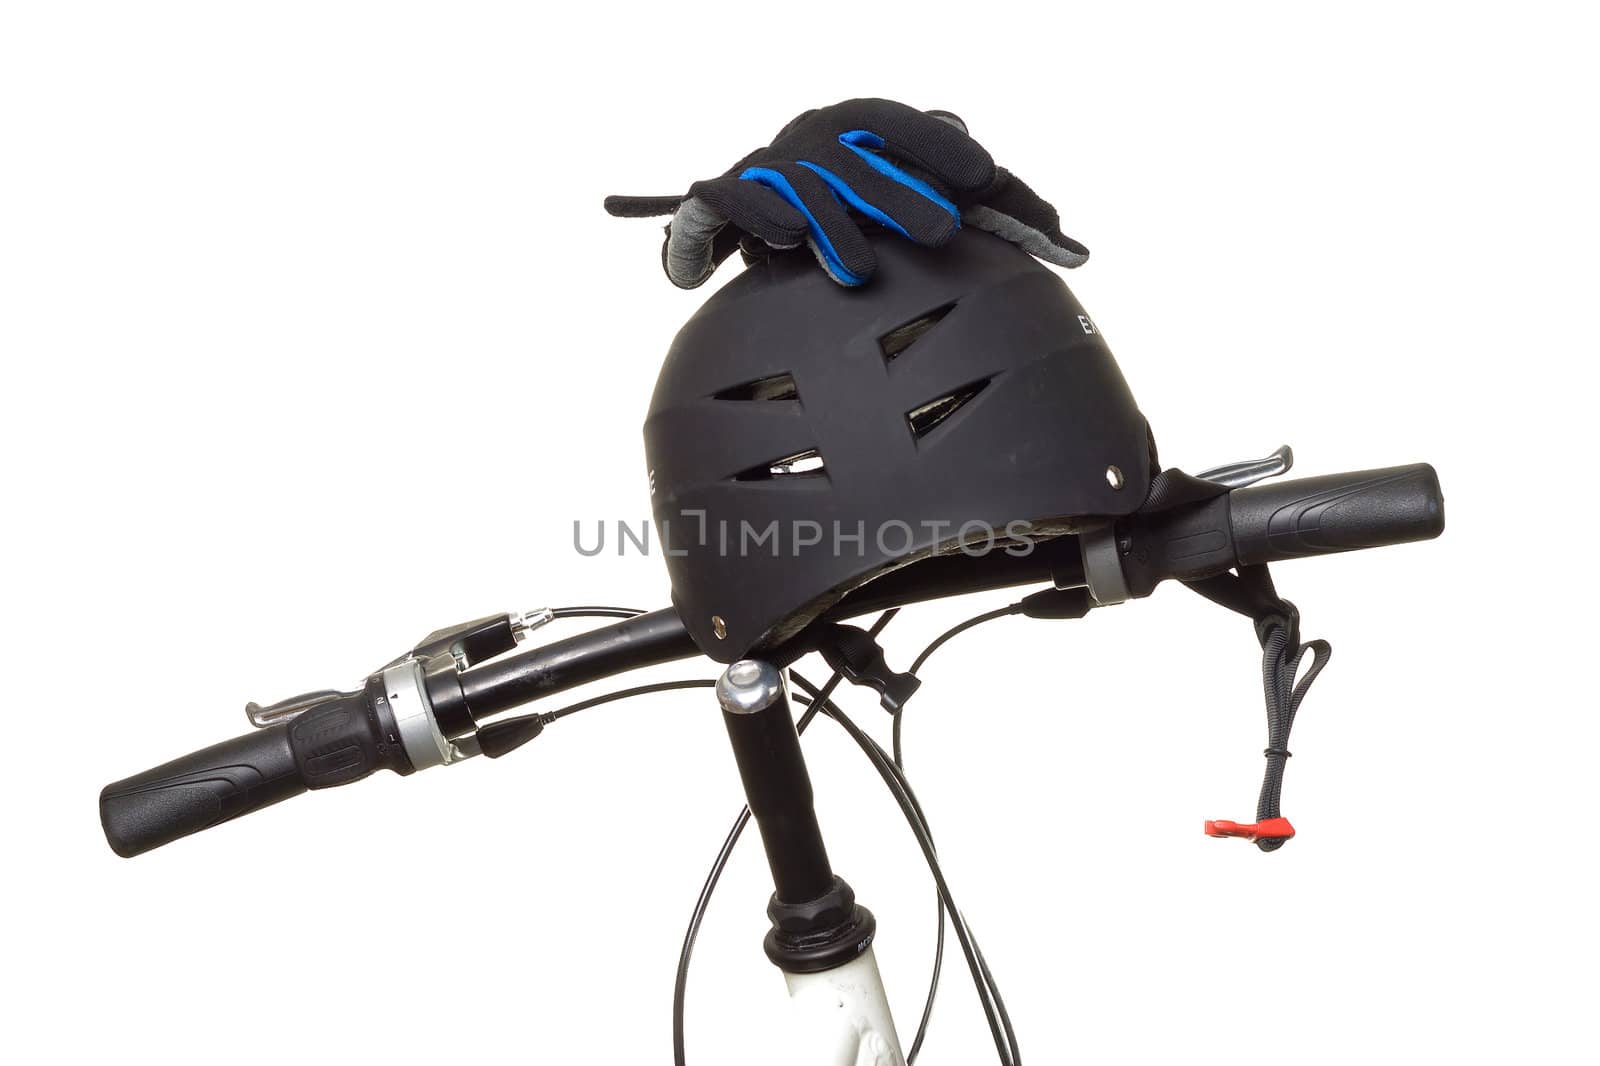 Bicycle handlebar with a helmet and gloves resting on top